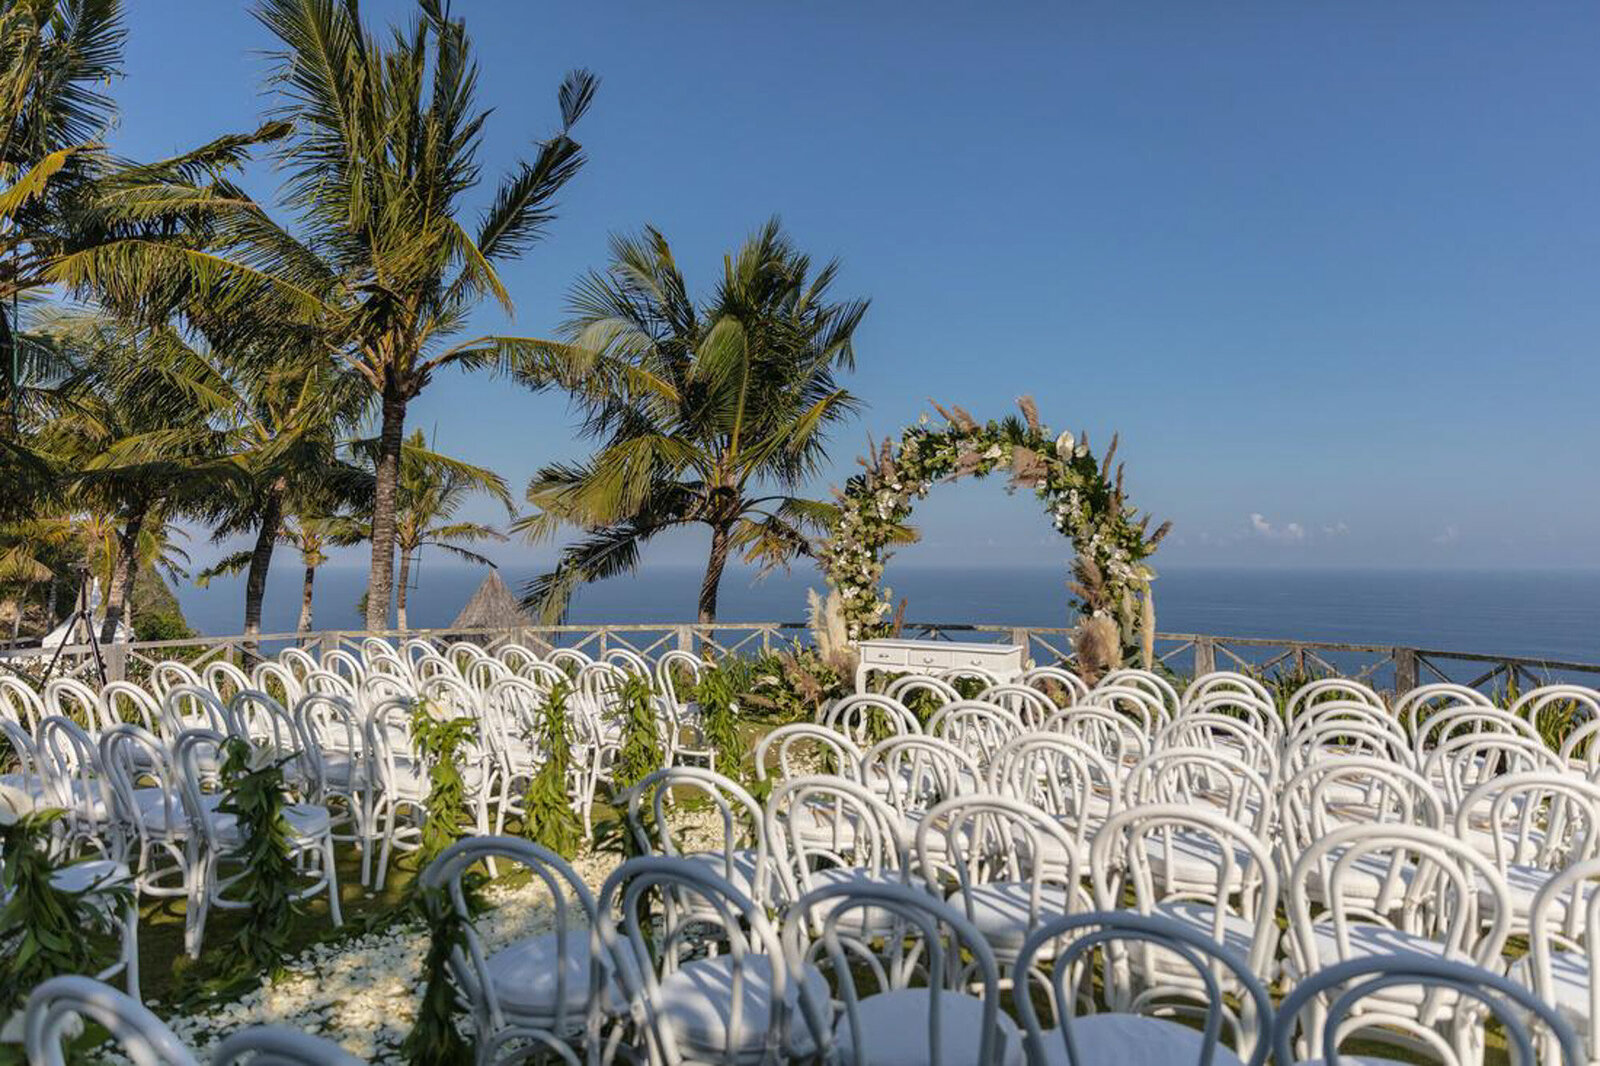 Beach wedding ceremony with white chairs and floral arch backdrop